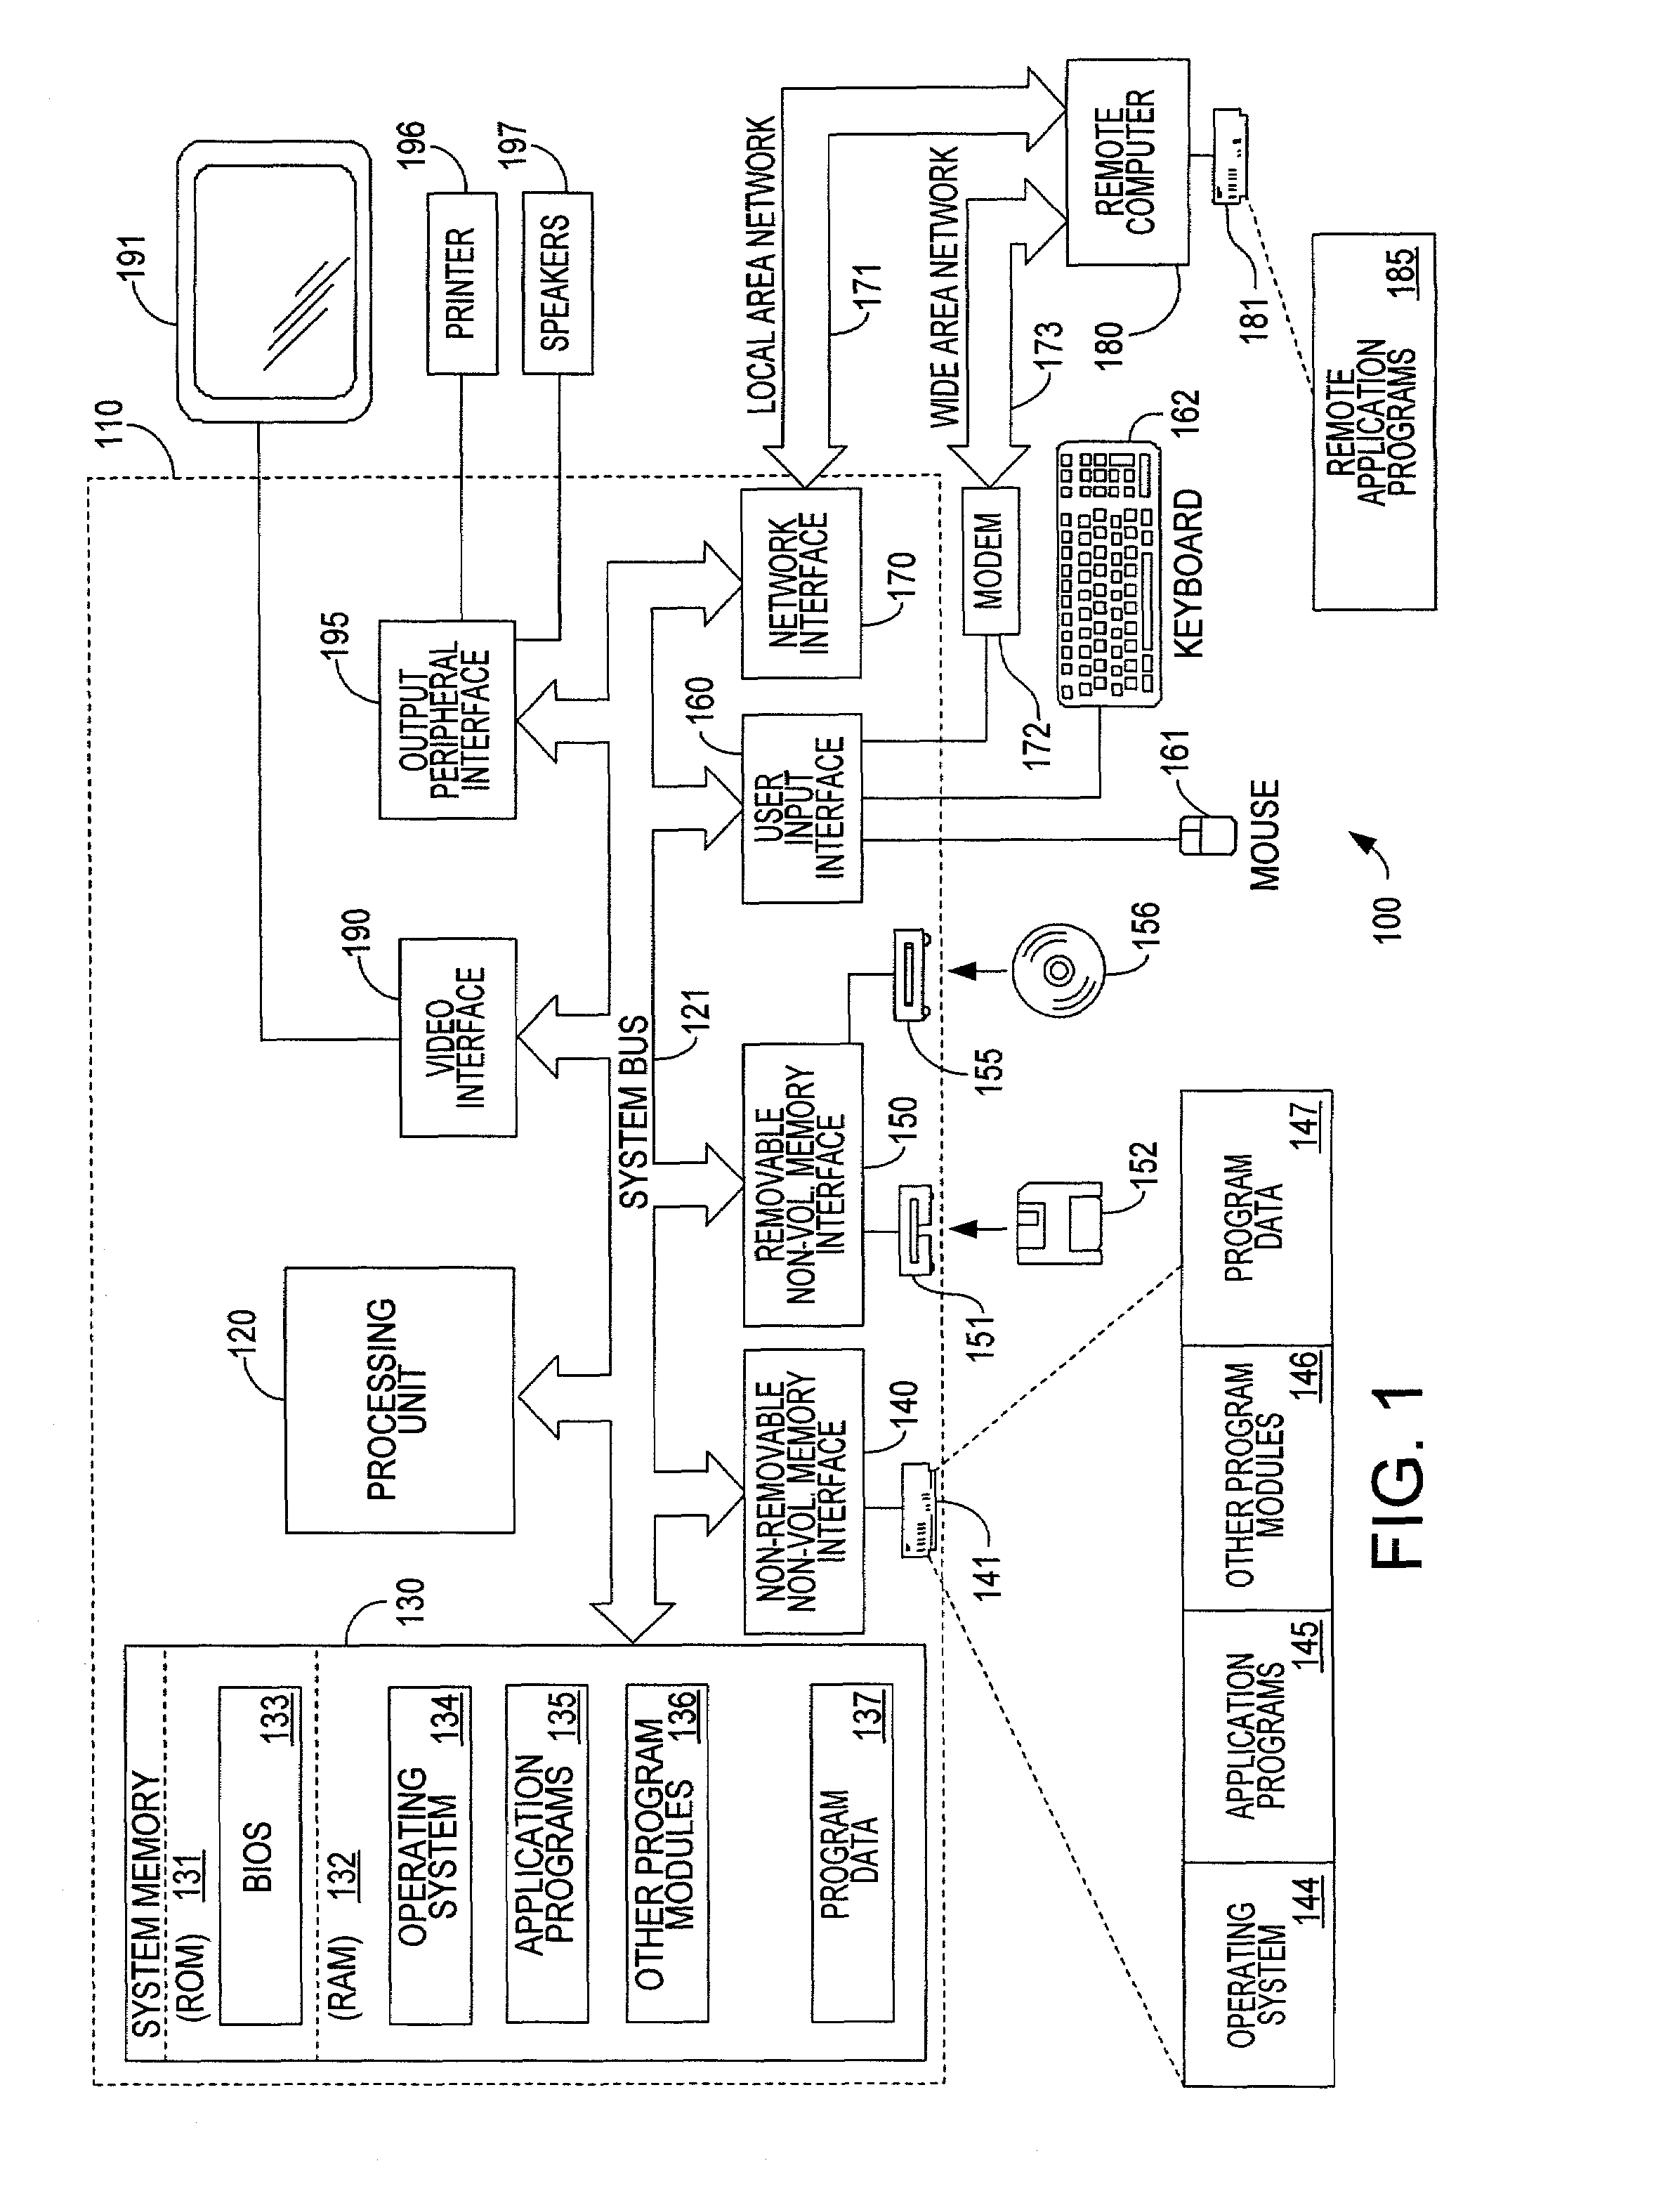 Peer-to-peer group management and method for maintaining peer-to-peer graphs